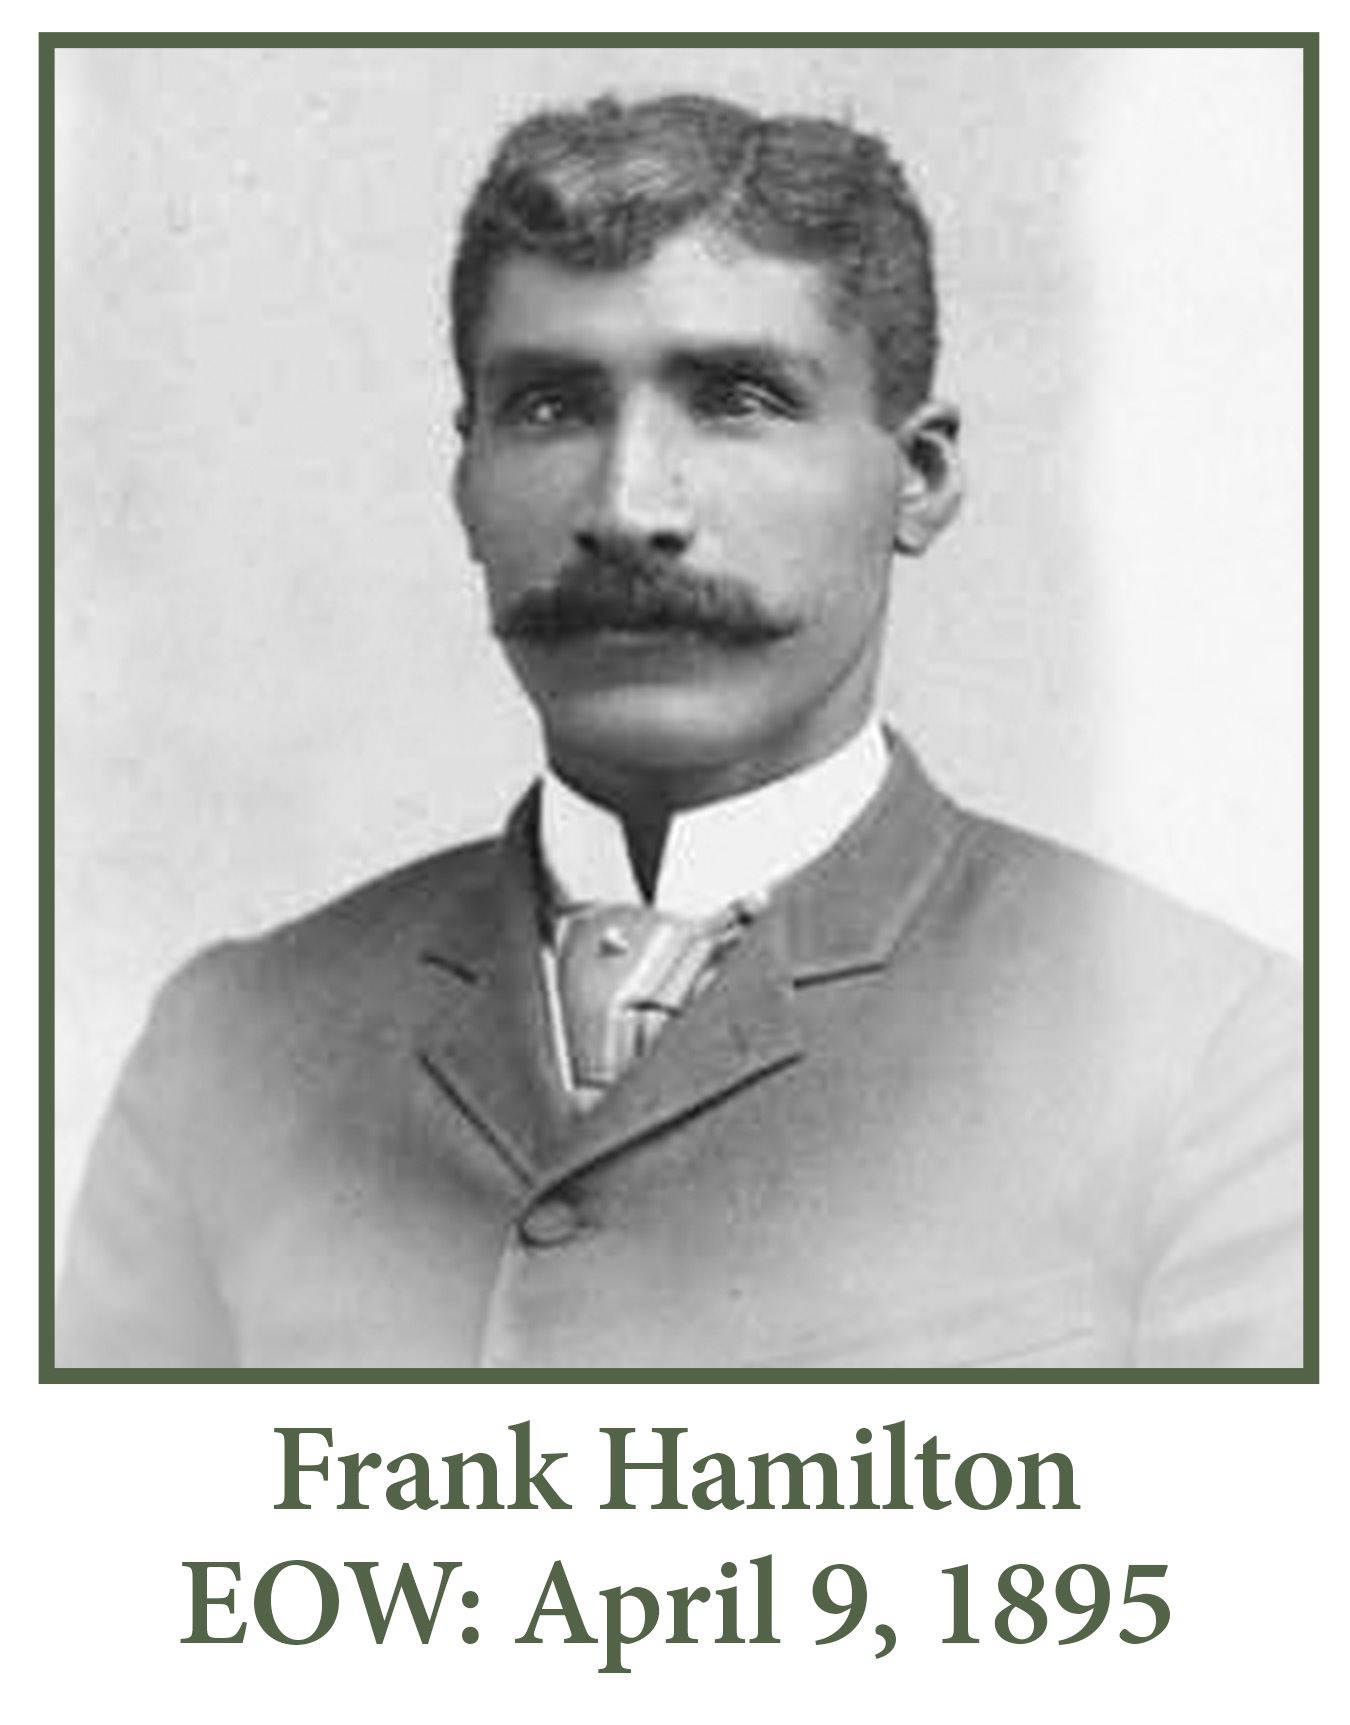 Frank Hamilton EOW April 8 1895 Opens in new window